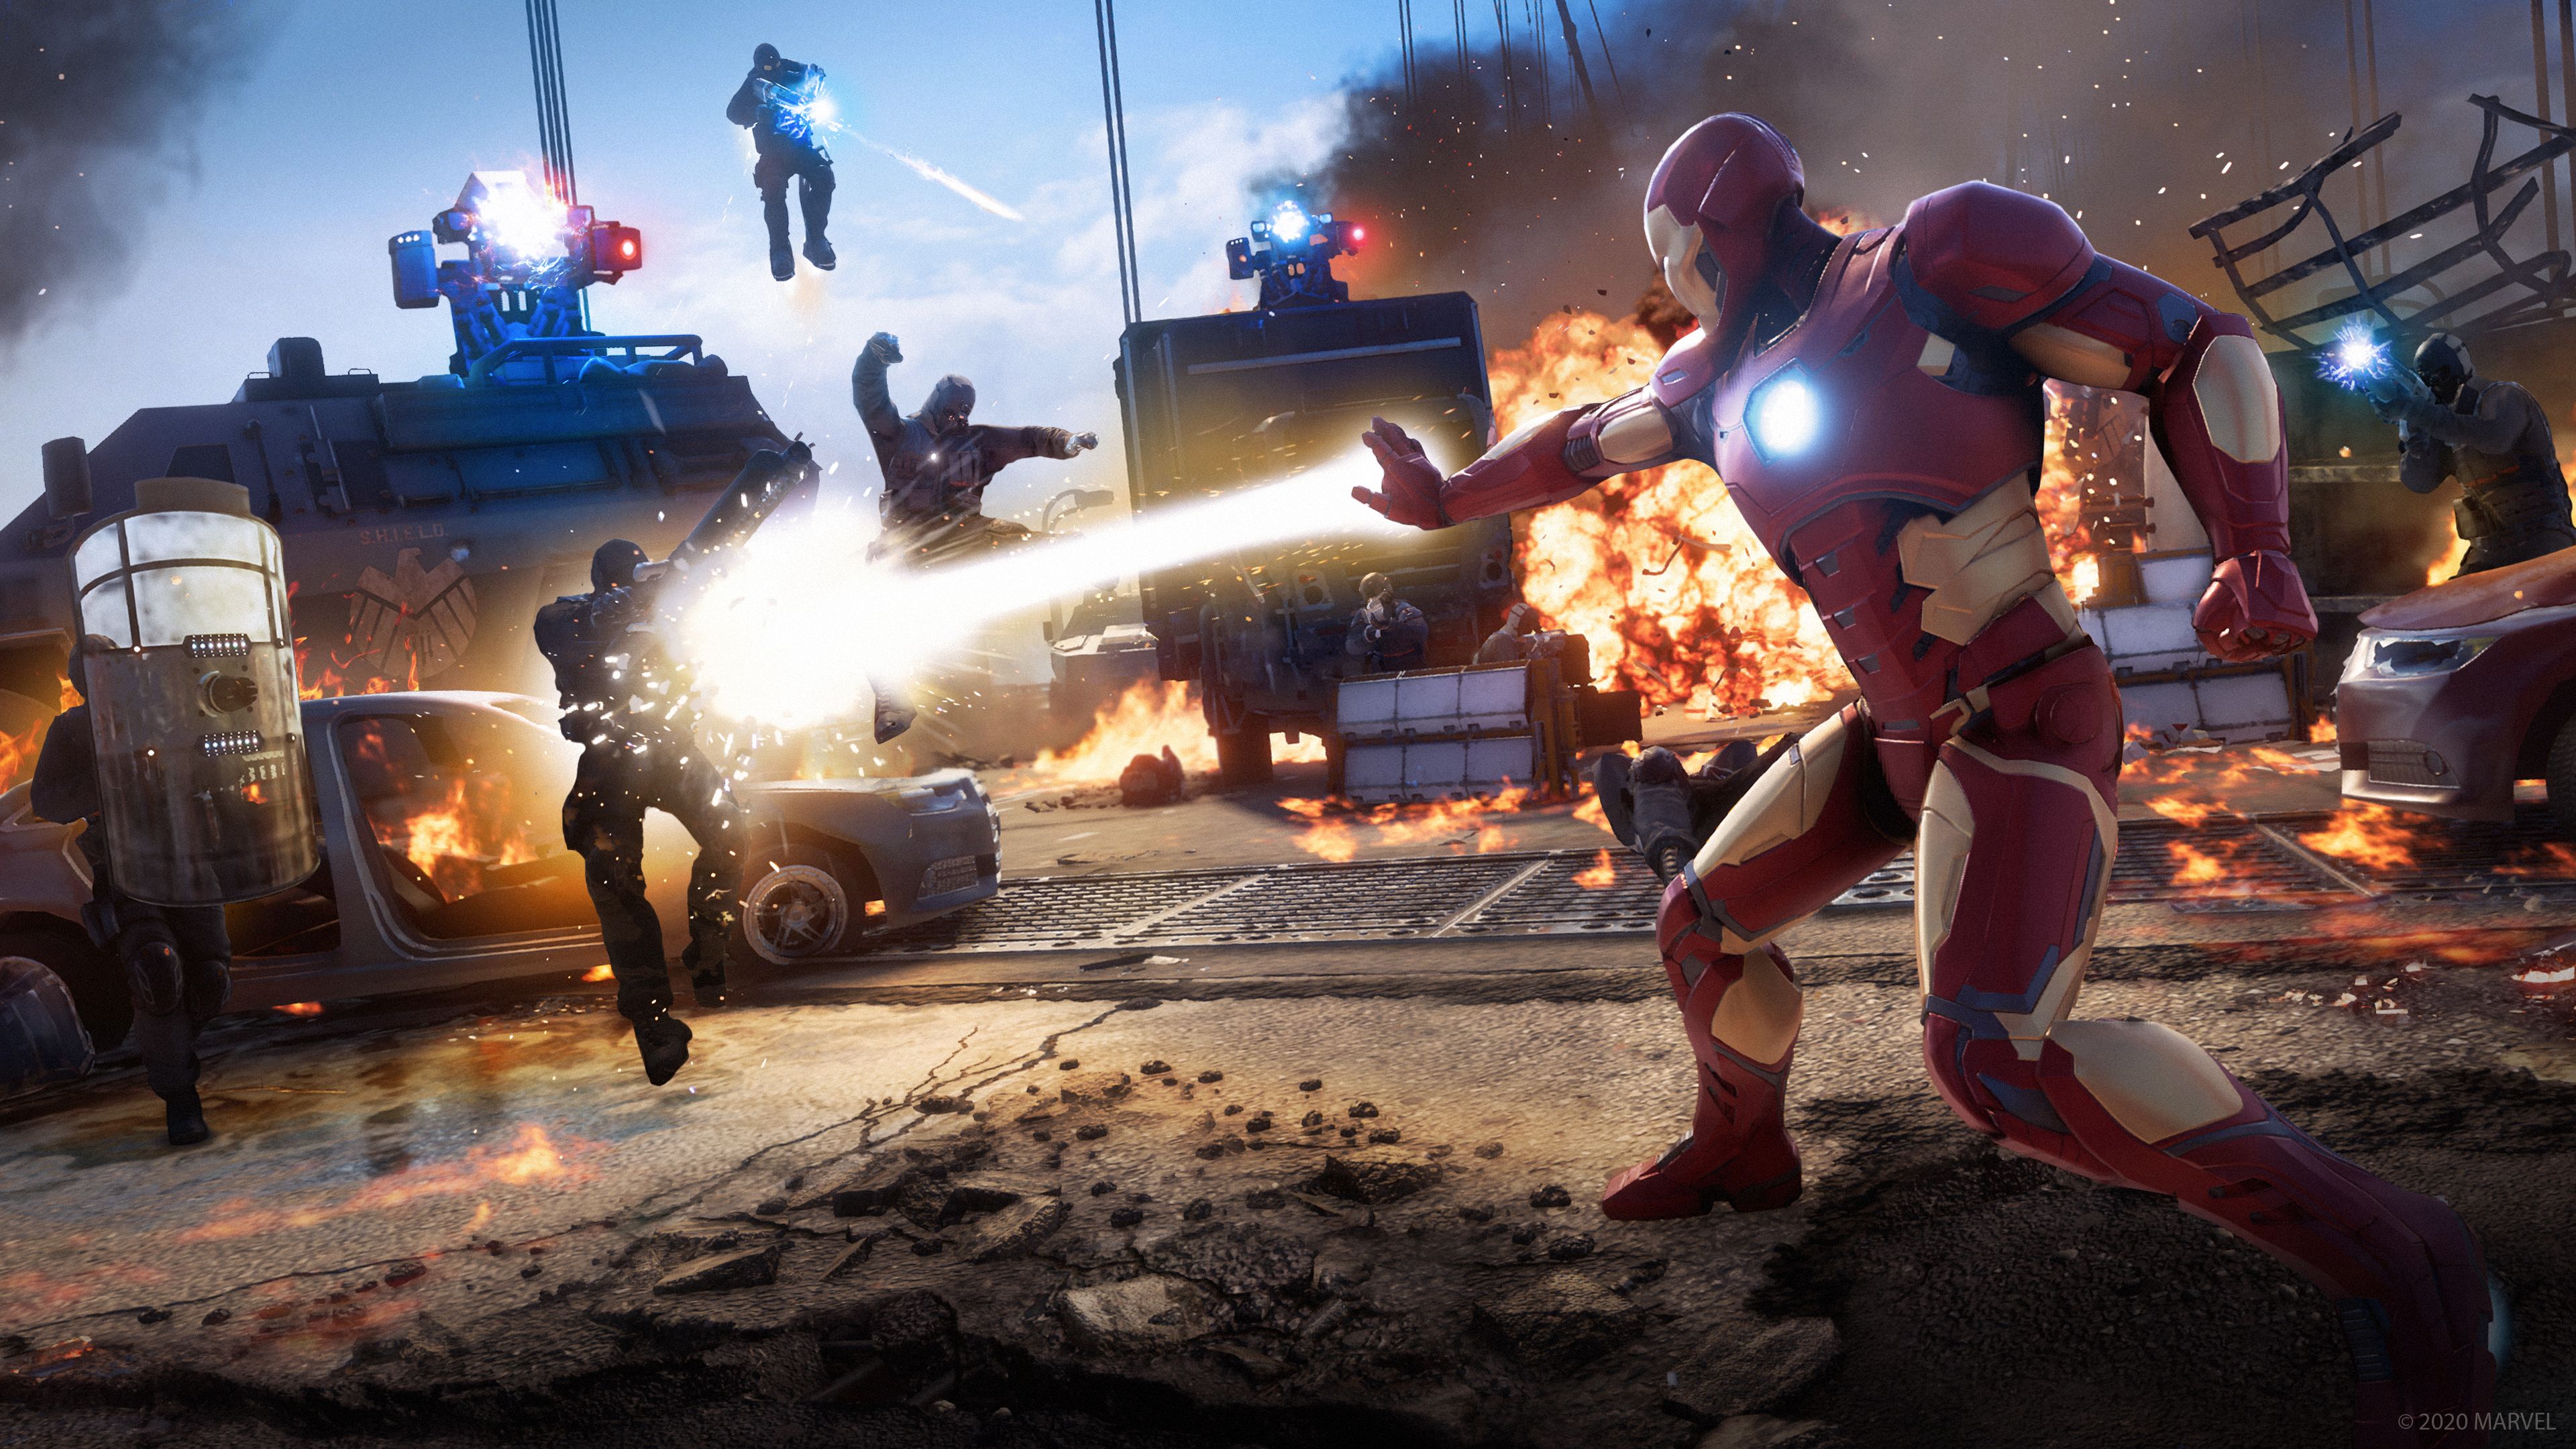 Marvel's Avengers' Beta: Schedule, to Pre-load and What to Expect